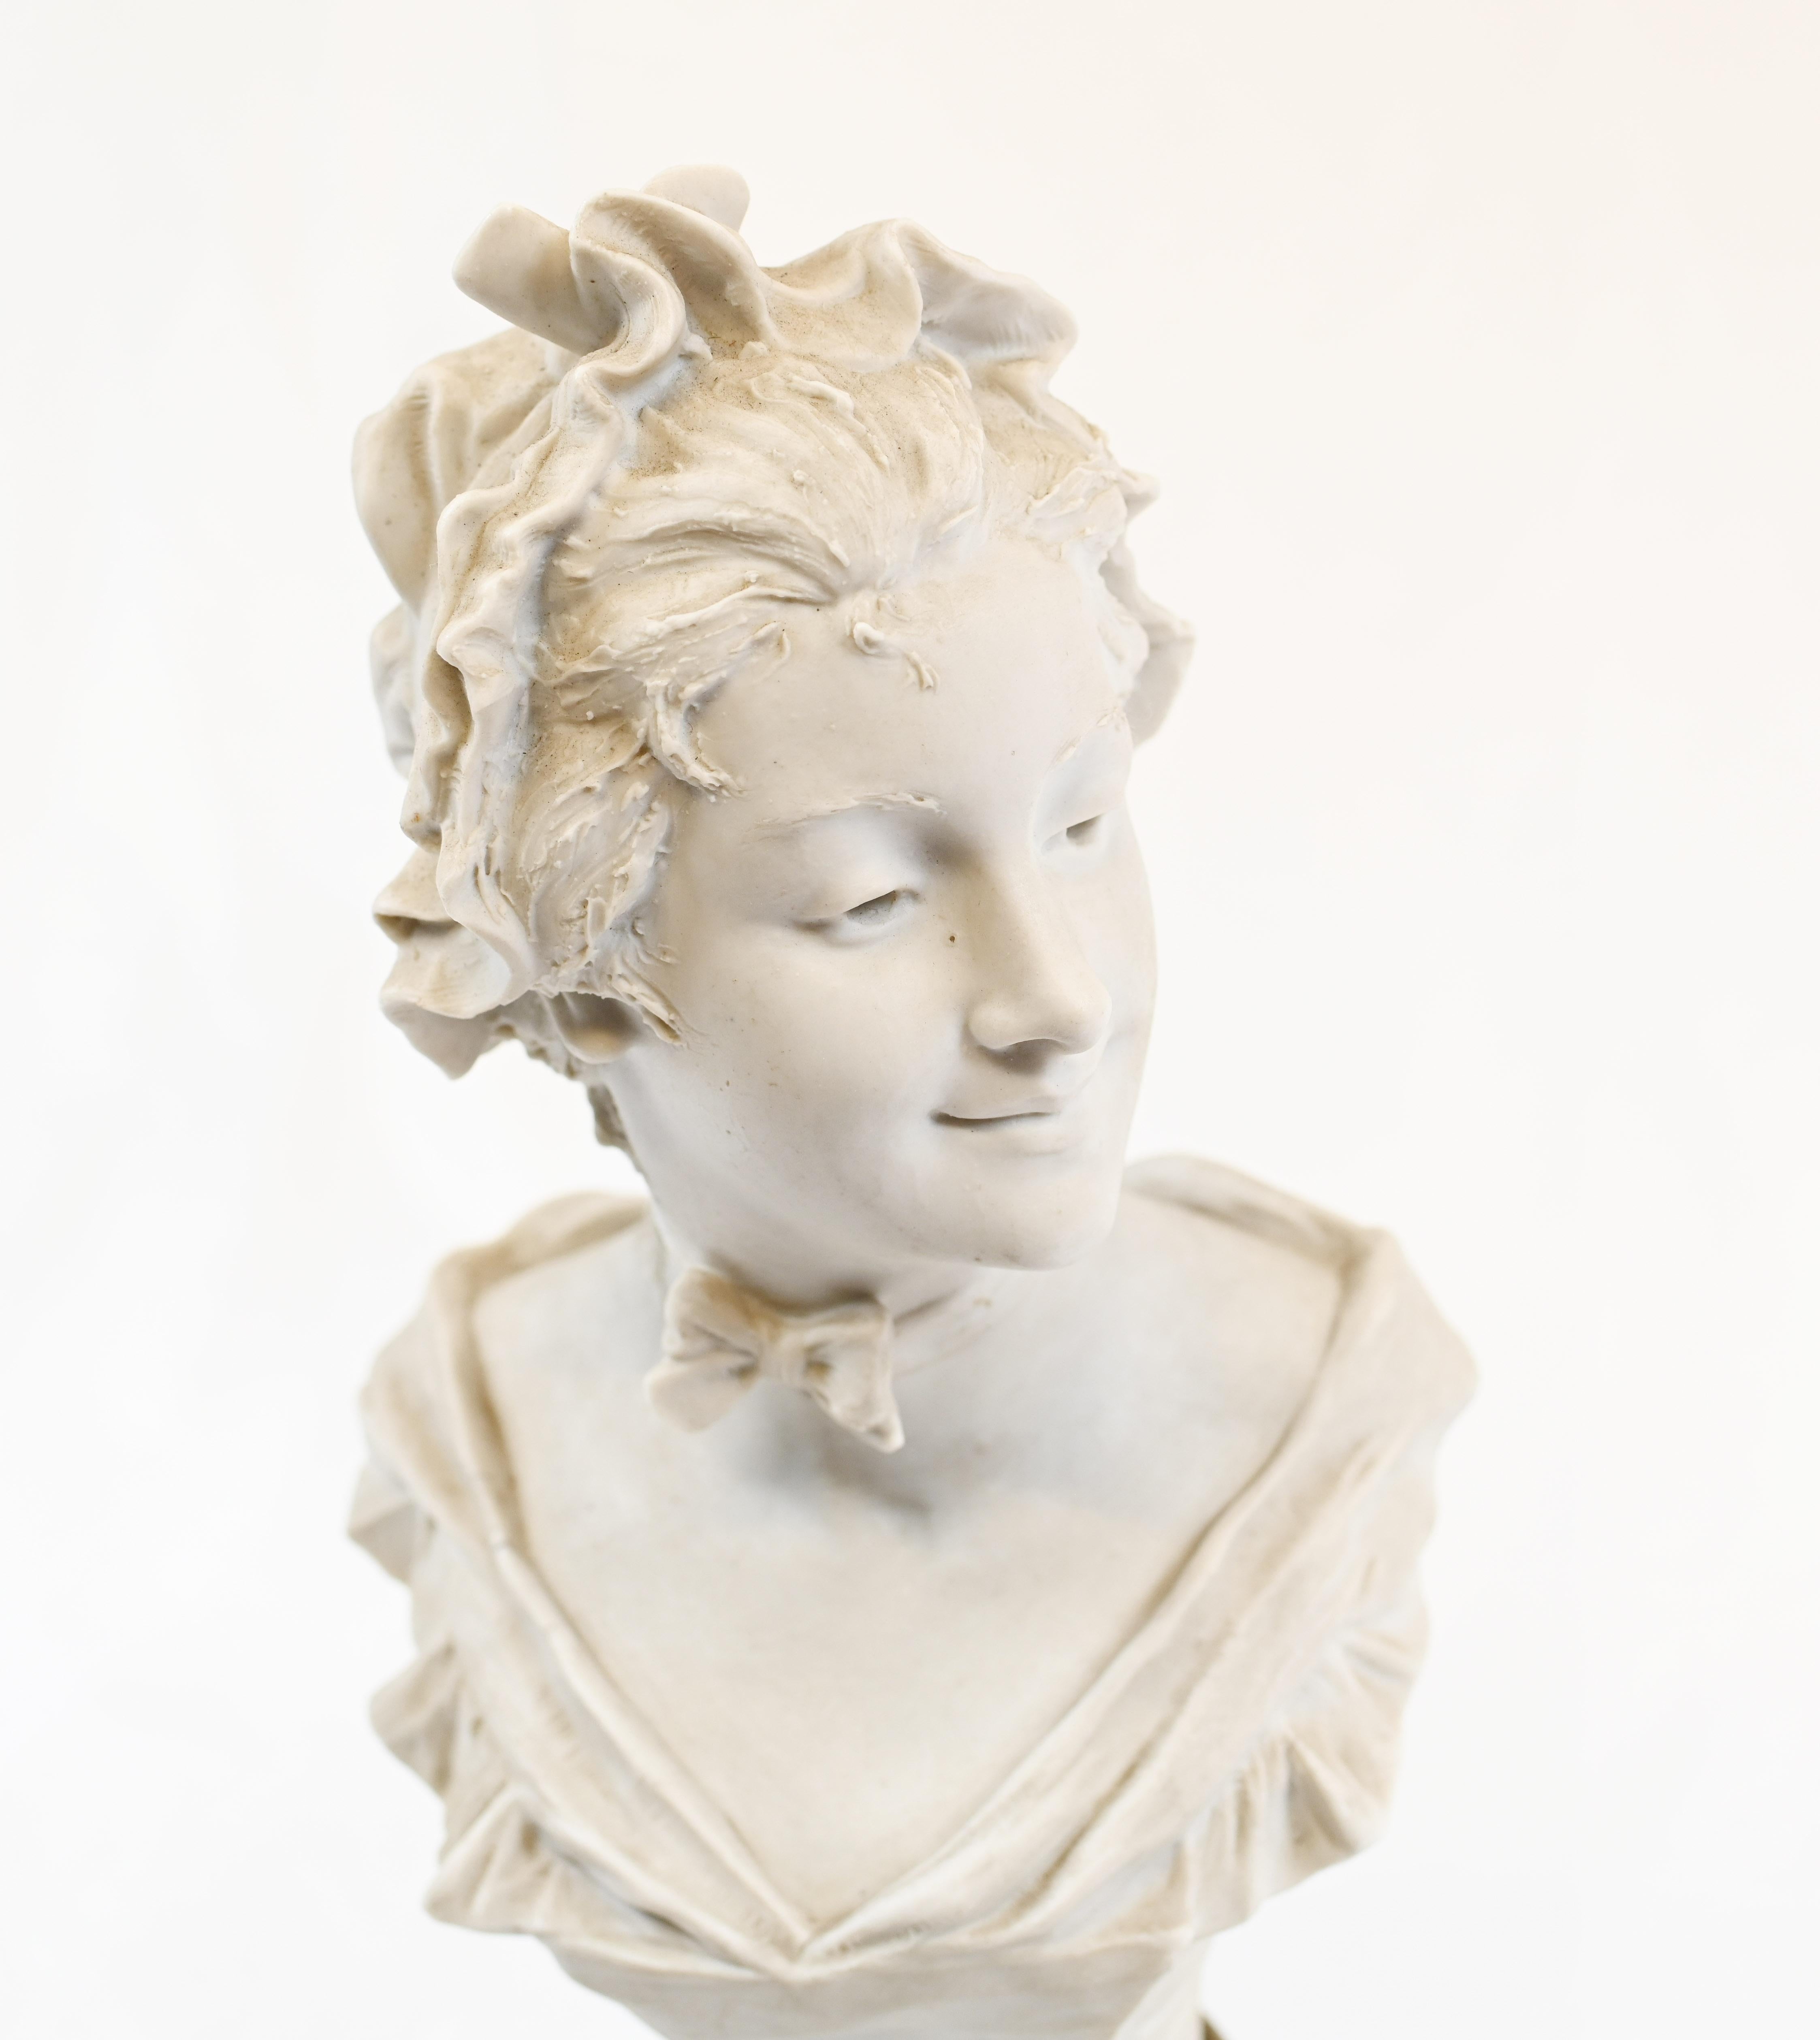 Wonderful Belgium antique biscuit porcelain bust of a young girl
On the base the enscription reads: Dorine Sculp Leop Harze
Léopold Harzé (1831–1893) was a Belgian sculptor who worked in Brussels. He is well known for his terracotta pieces, but